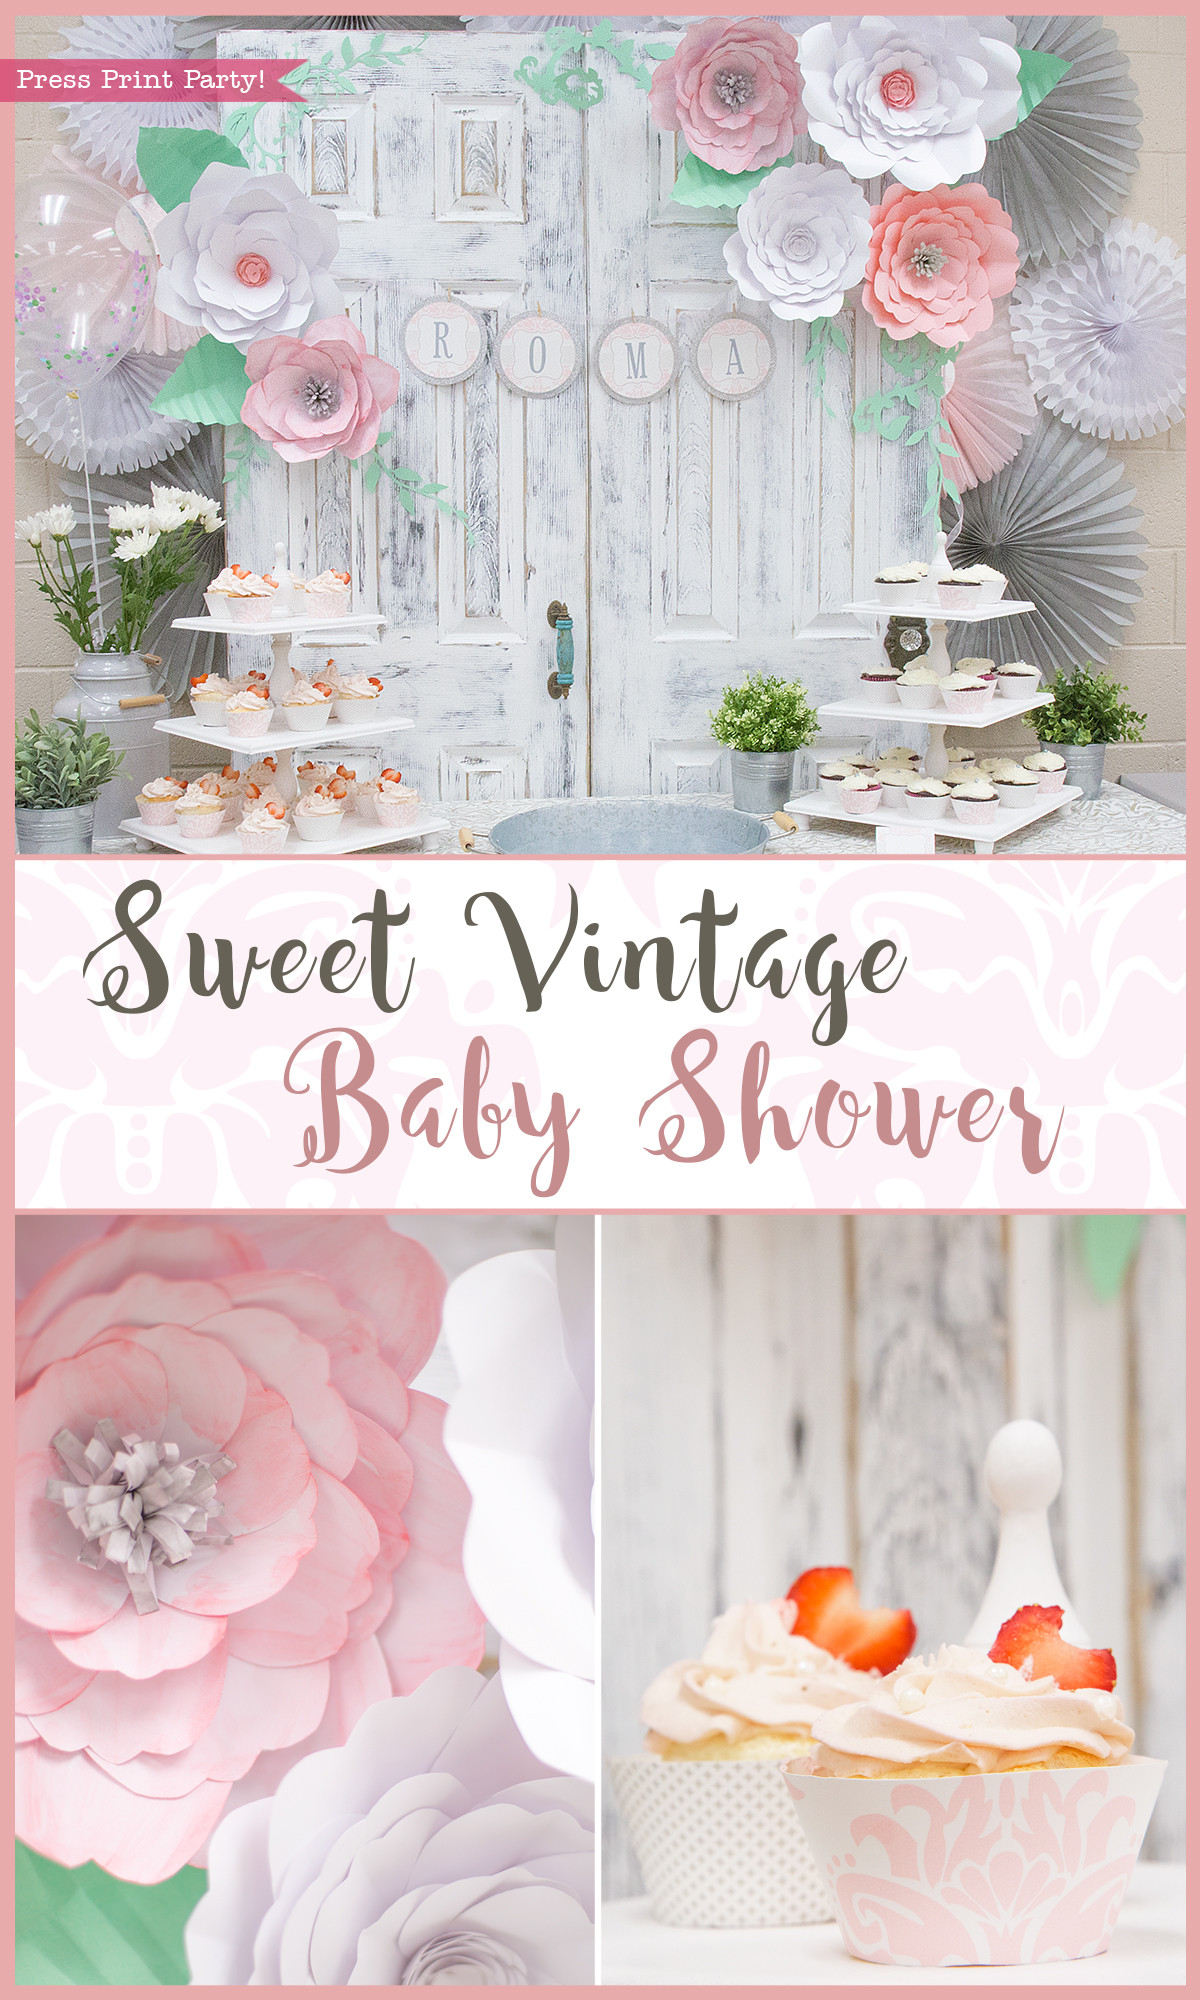 Decoration Ideas For Baby Shower
 A Sweet Vintage Baby Shower By Press Print Party